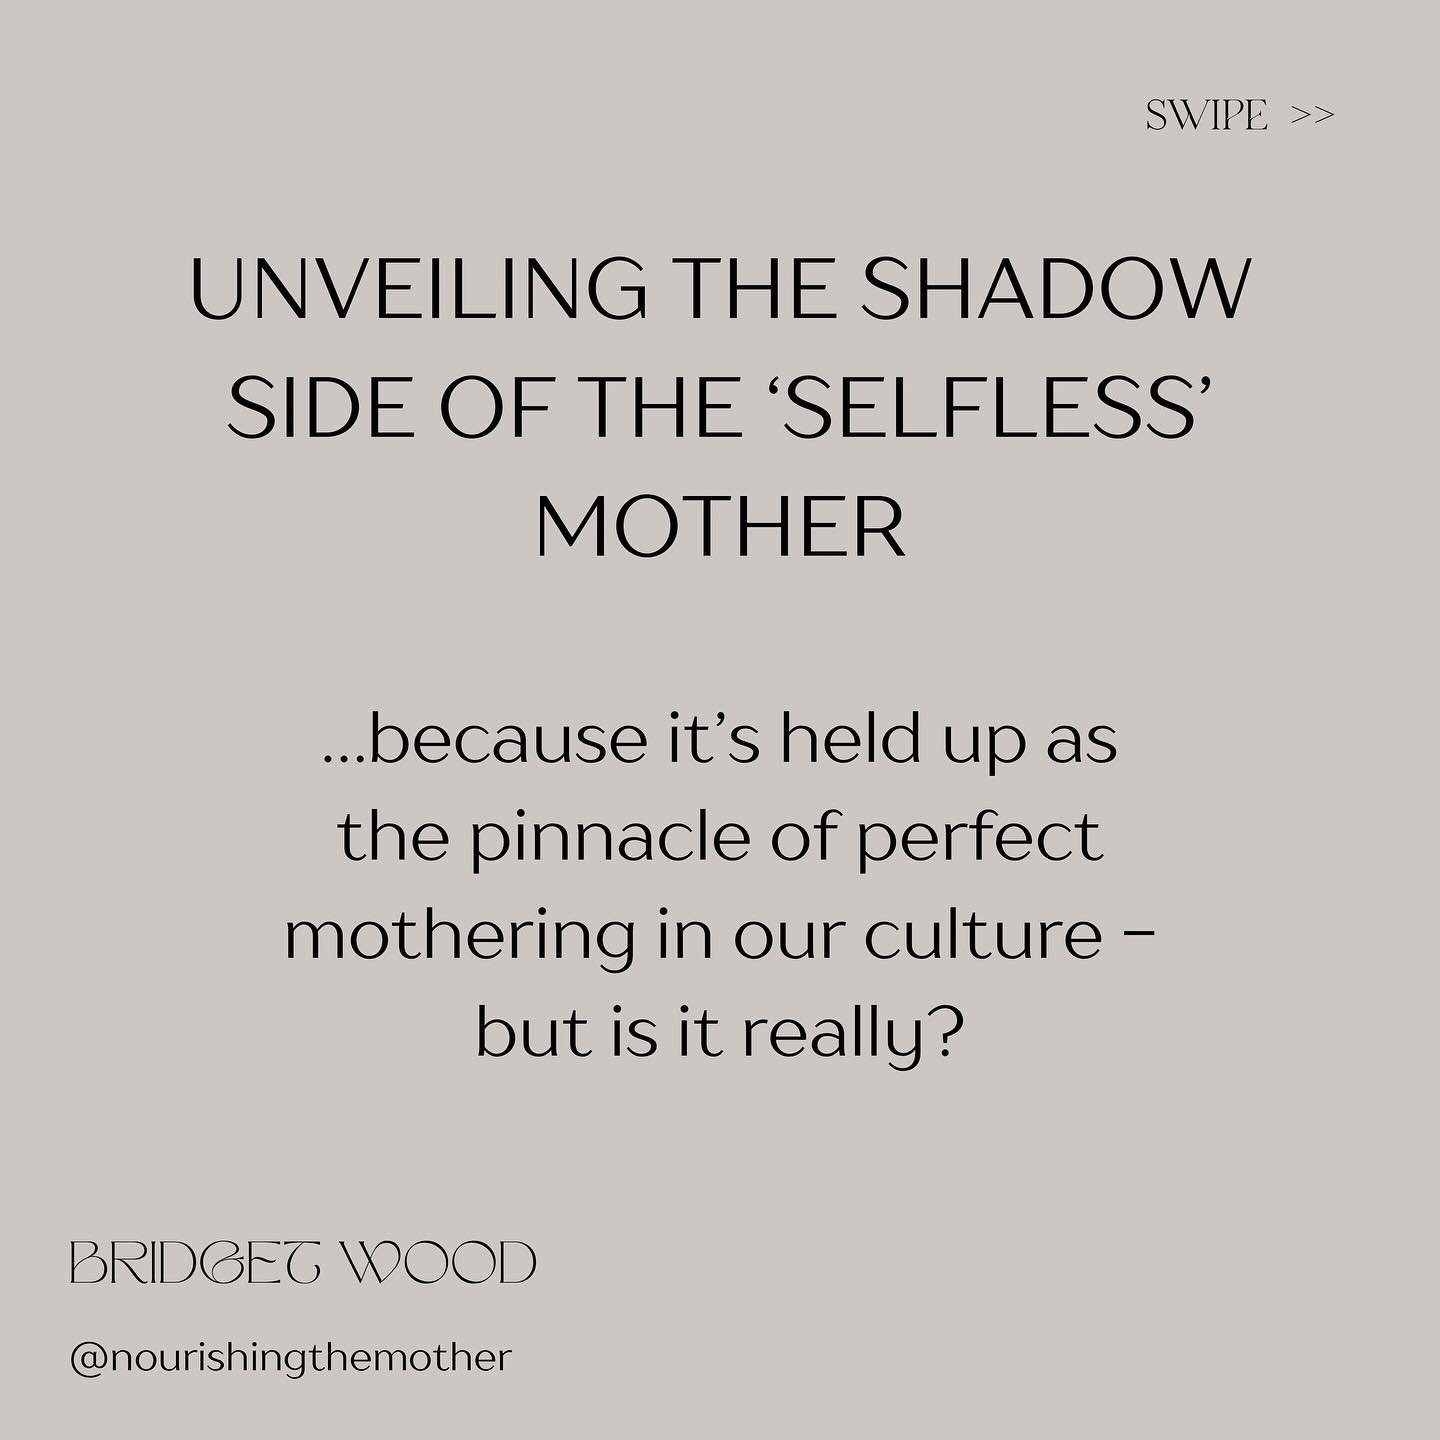 The moment you recognise that whatever you label as &lsquo;selfless&rsquo; has within it an inherent selfishness, you lead your own life, rather than being lead by your social conditioning 🥸

This week on the @nourishingthemother podcast we get into